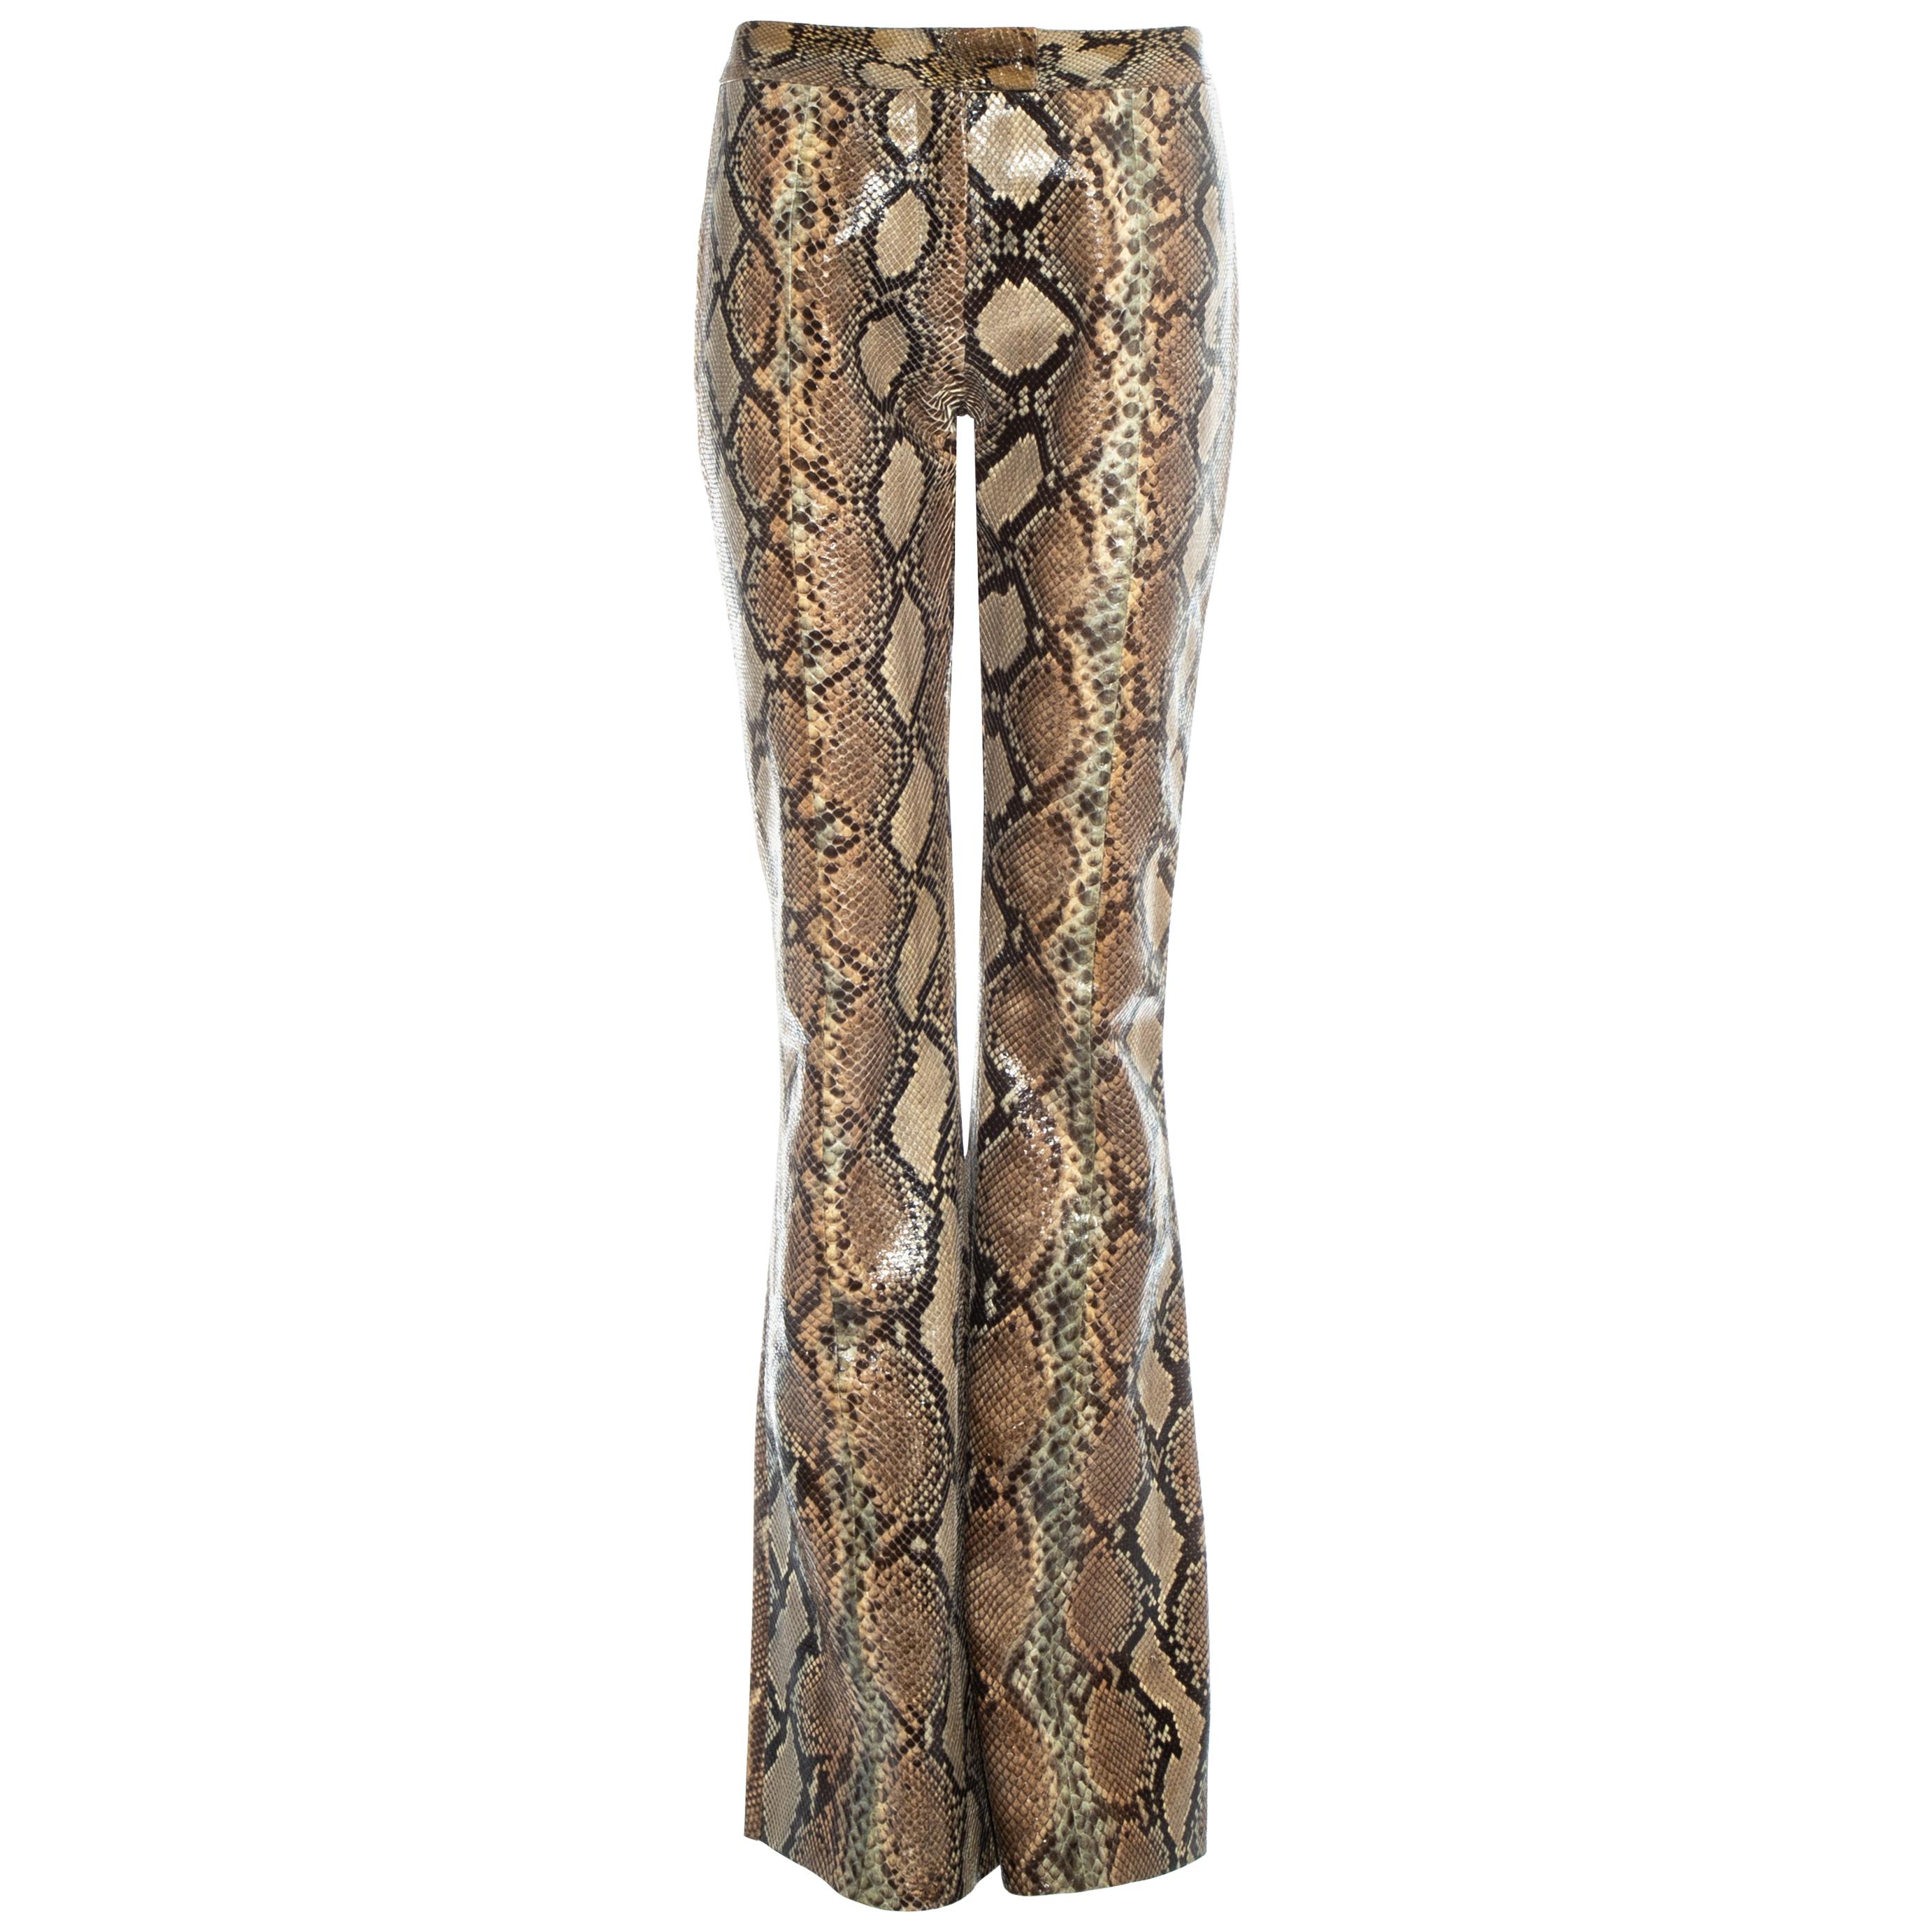 Gucci by Tom Ford tan python leather flared pants, ss 2000